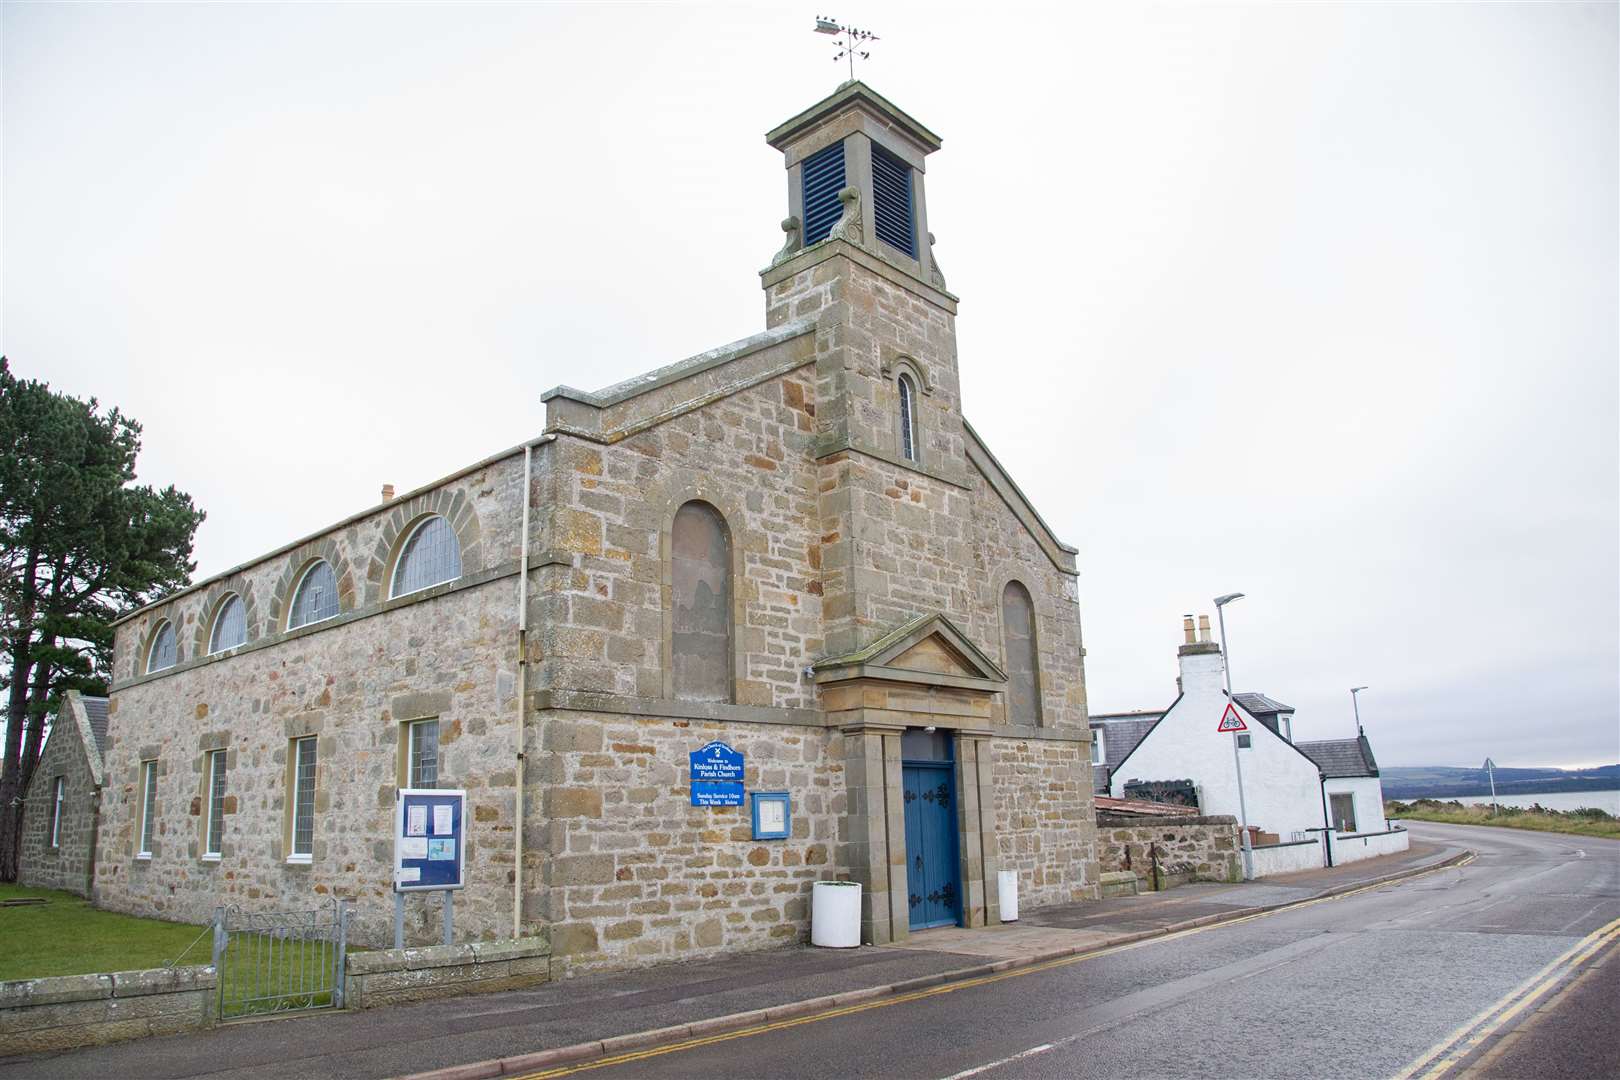 Findhorn Church was built in the mid 19th century as a Free Church and has survived without much alteration, although it is now Church of Scotland.